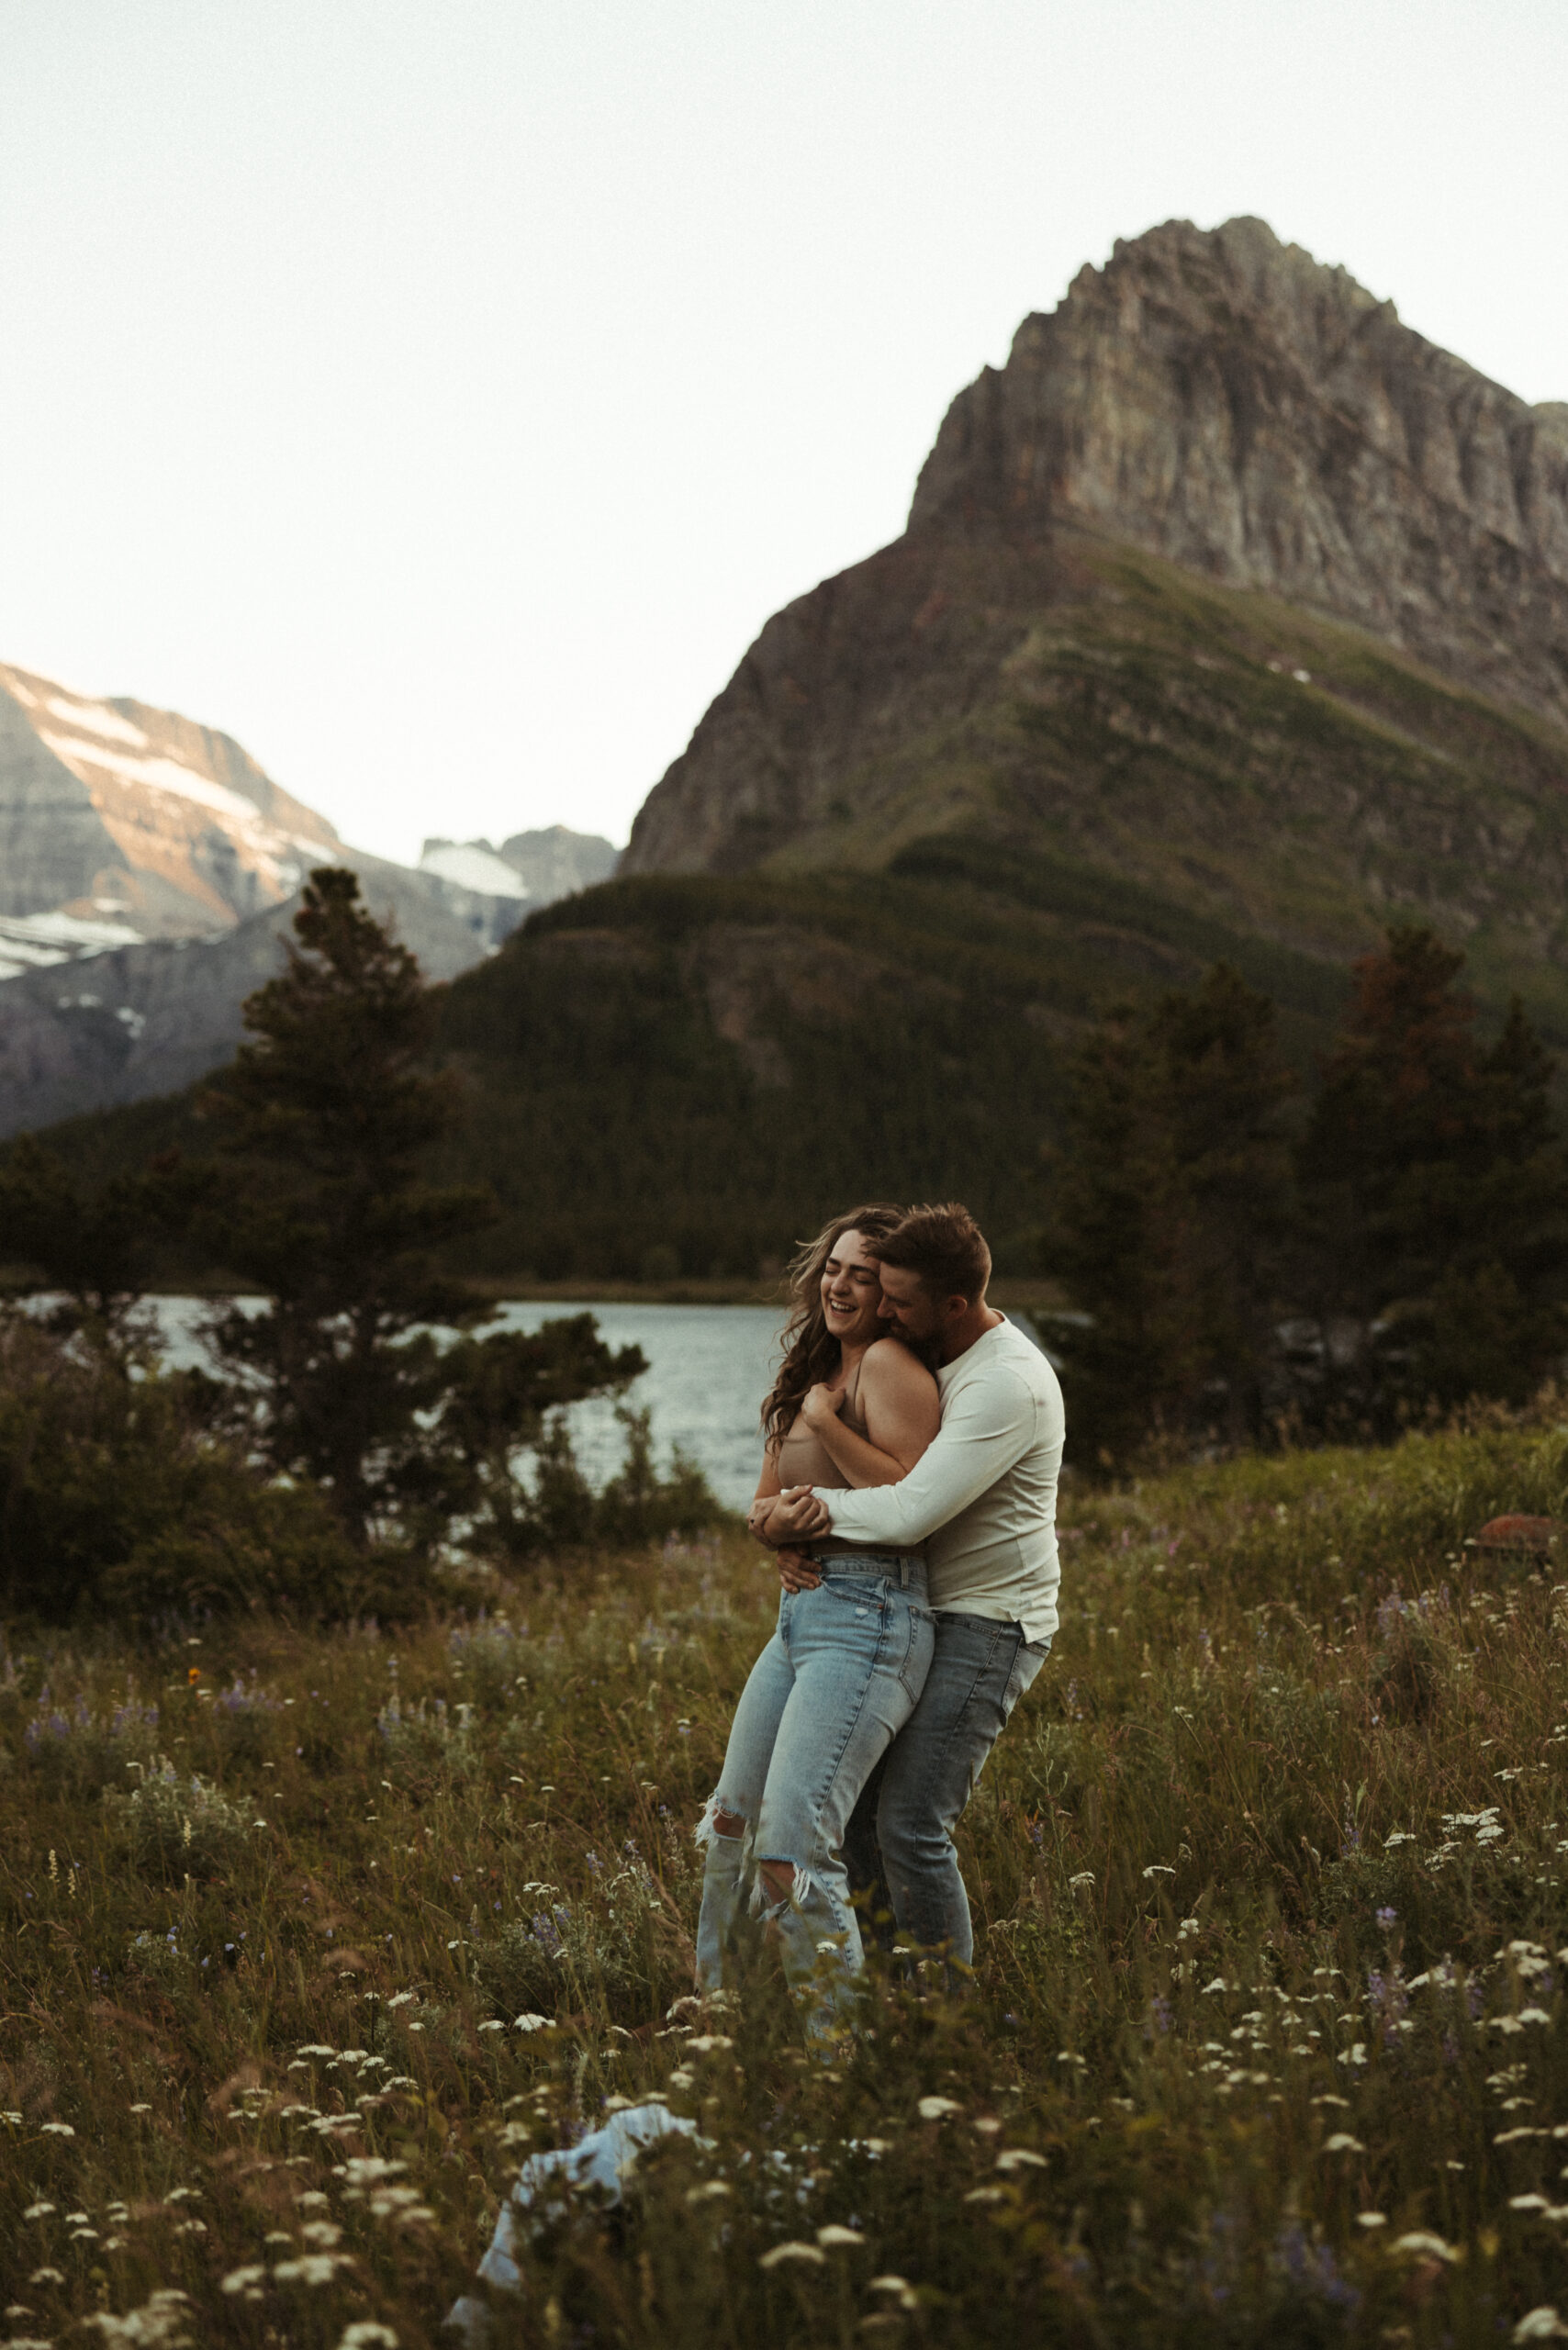 vintage couples photoshoot by the lake with mountains behind